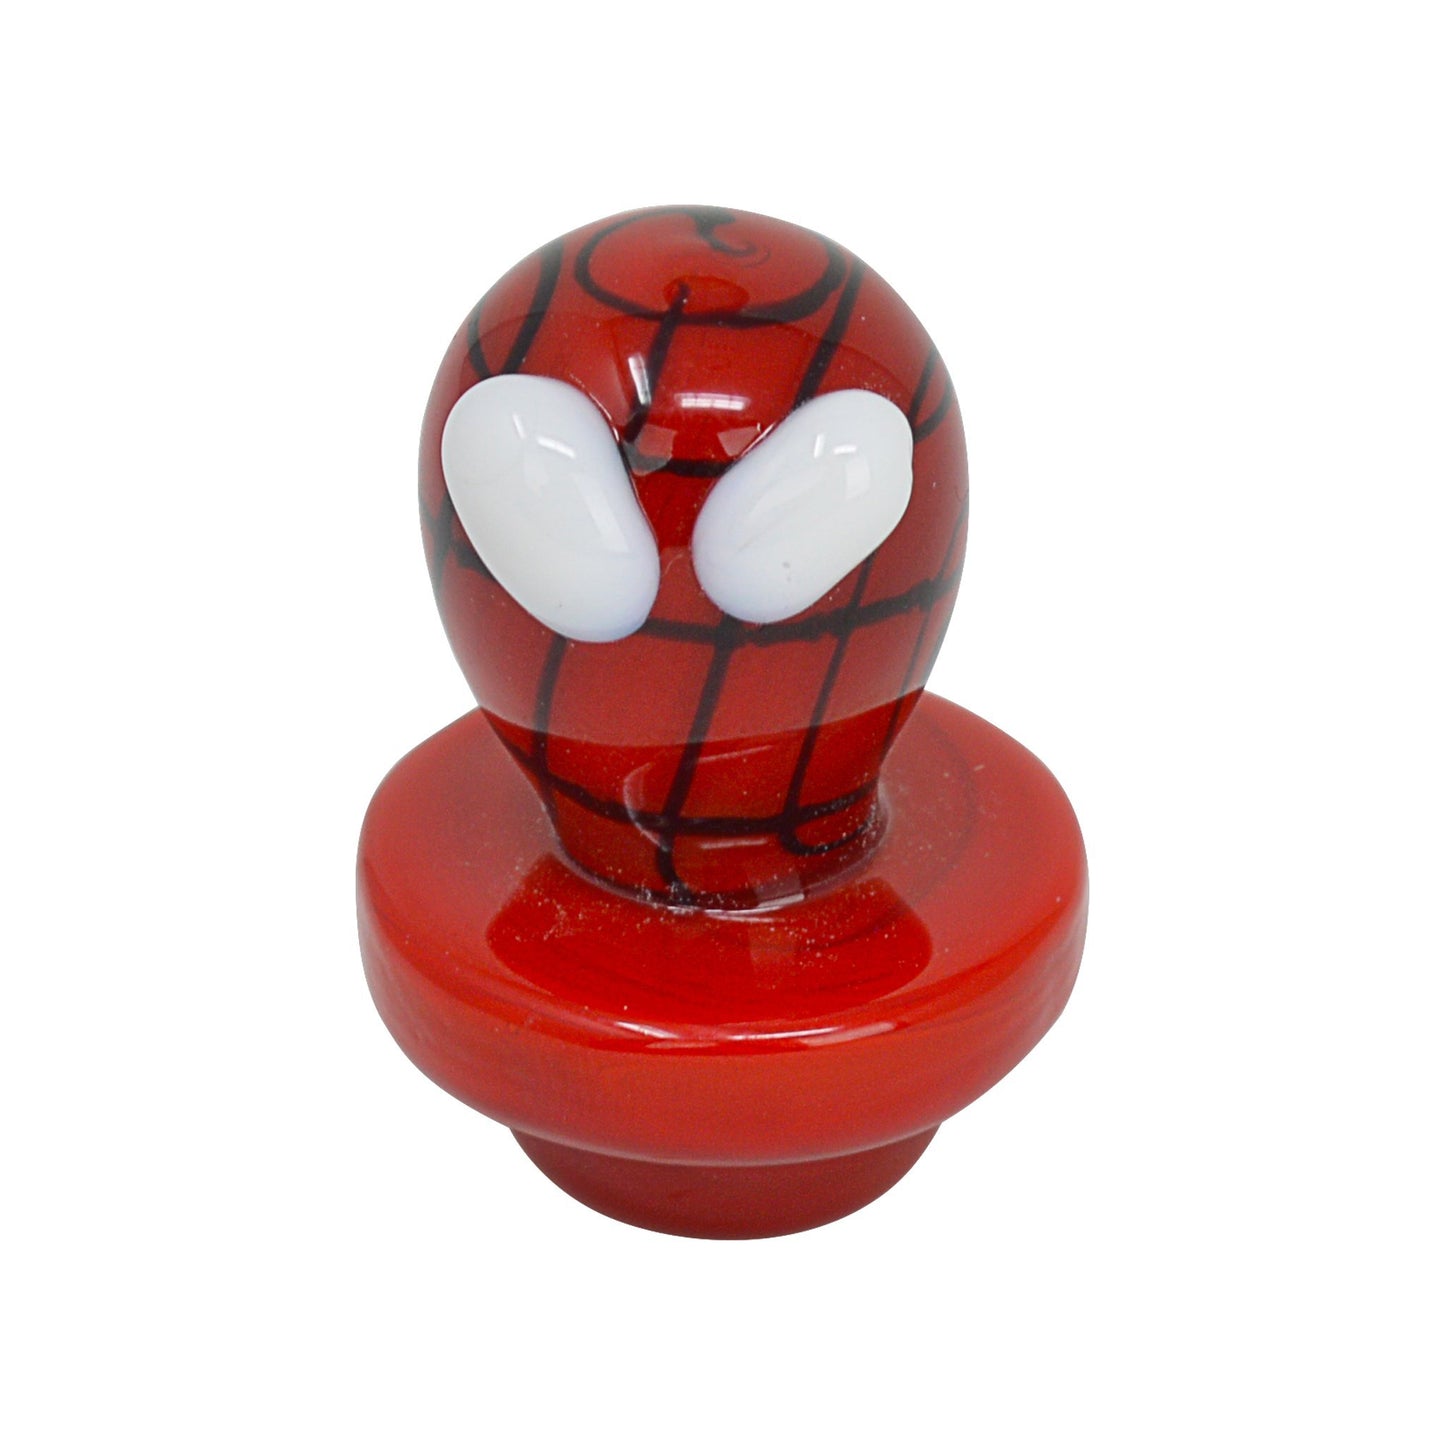 Pocket-friendly non-stick carb cap made of glass with Marvel's Spiderman design head acts as handle